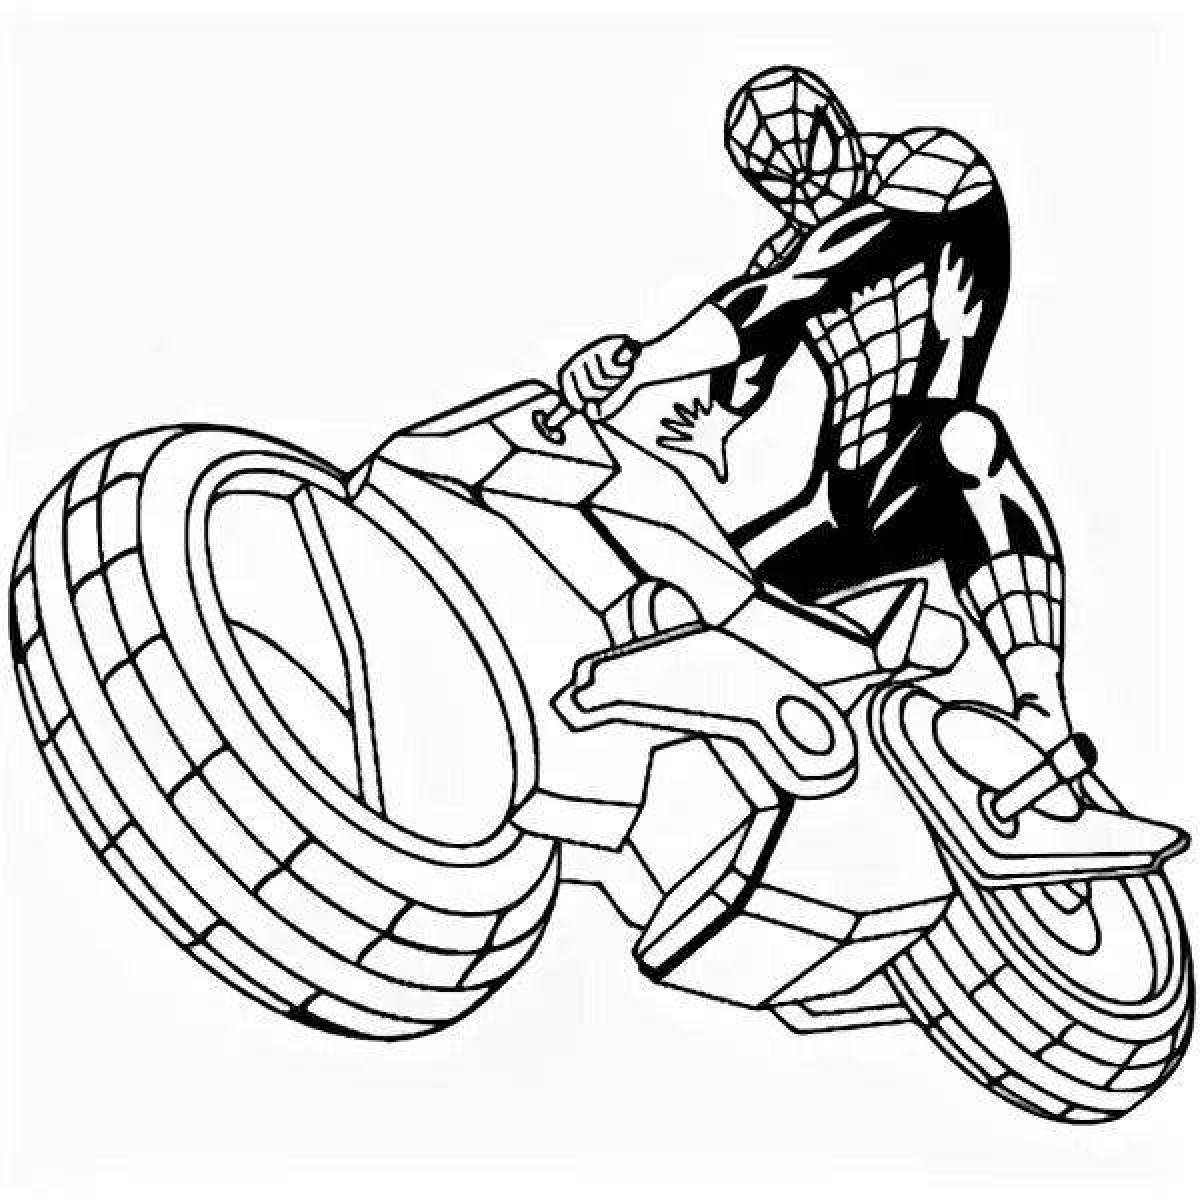 Heroic spider-man on a motorcycle